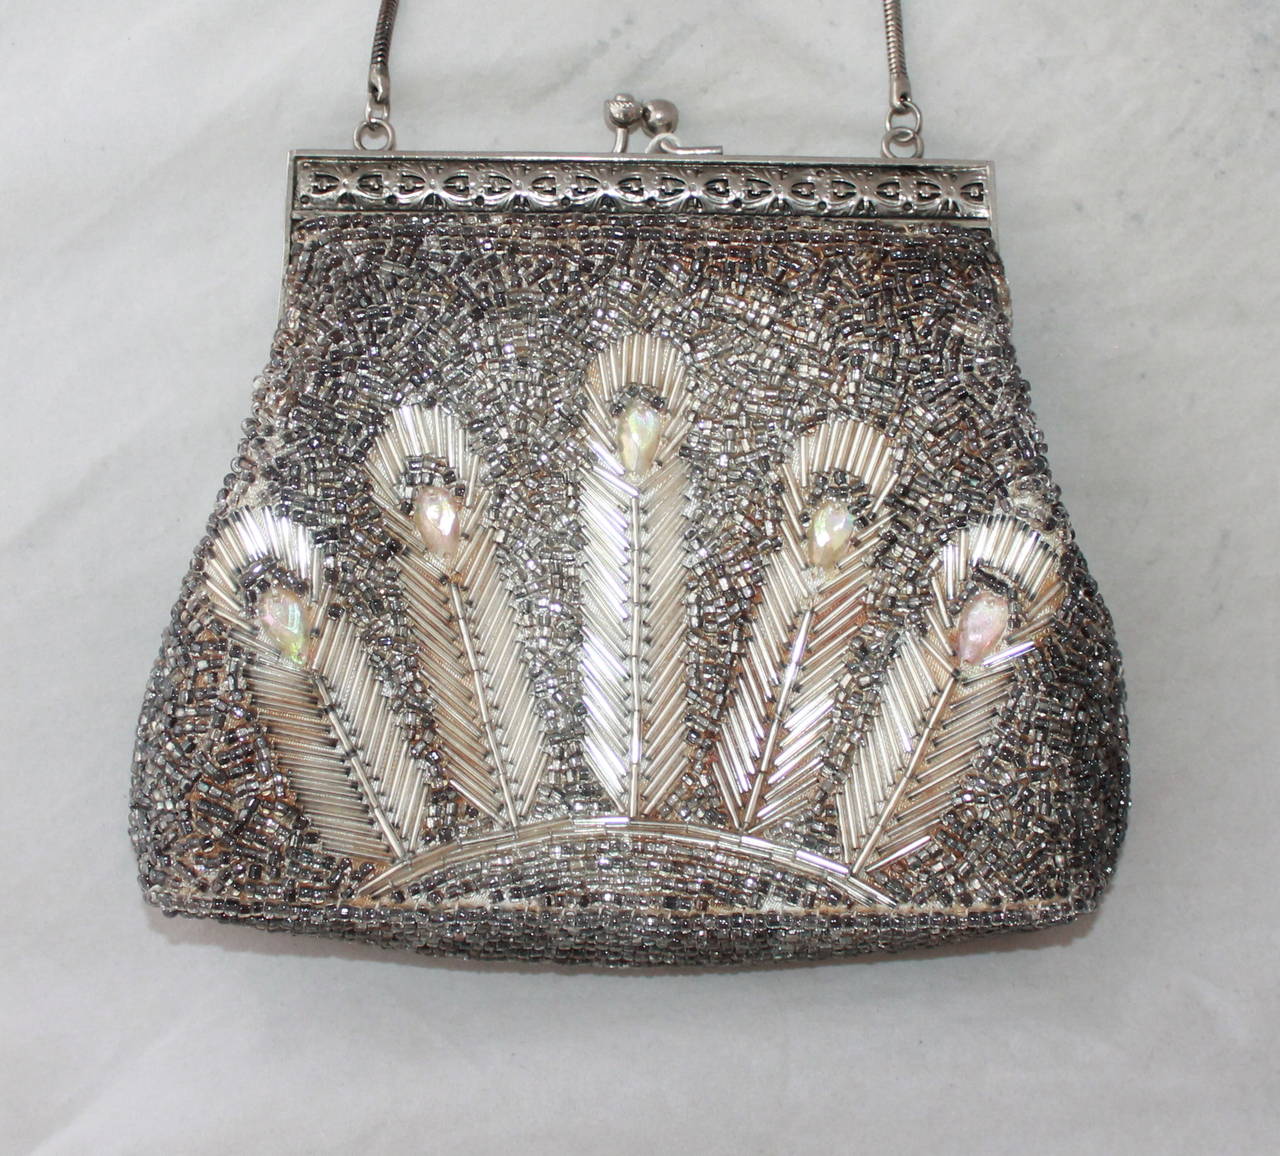 Art Deco Vintage Silver Peacock Feather Beaded Handbag. This bag is in excellent vintage condition and only has slight discoloring on the fabric under the beads from its age. The handle is thought to be sterling silver. 

Height- 5.25